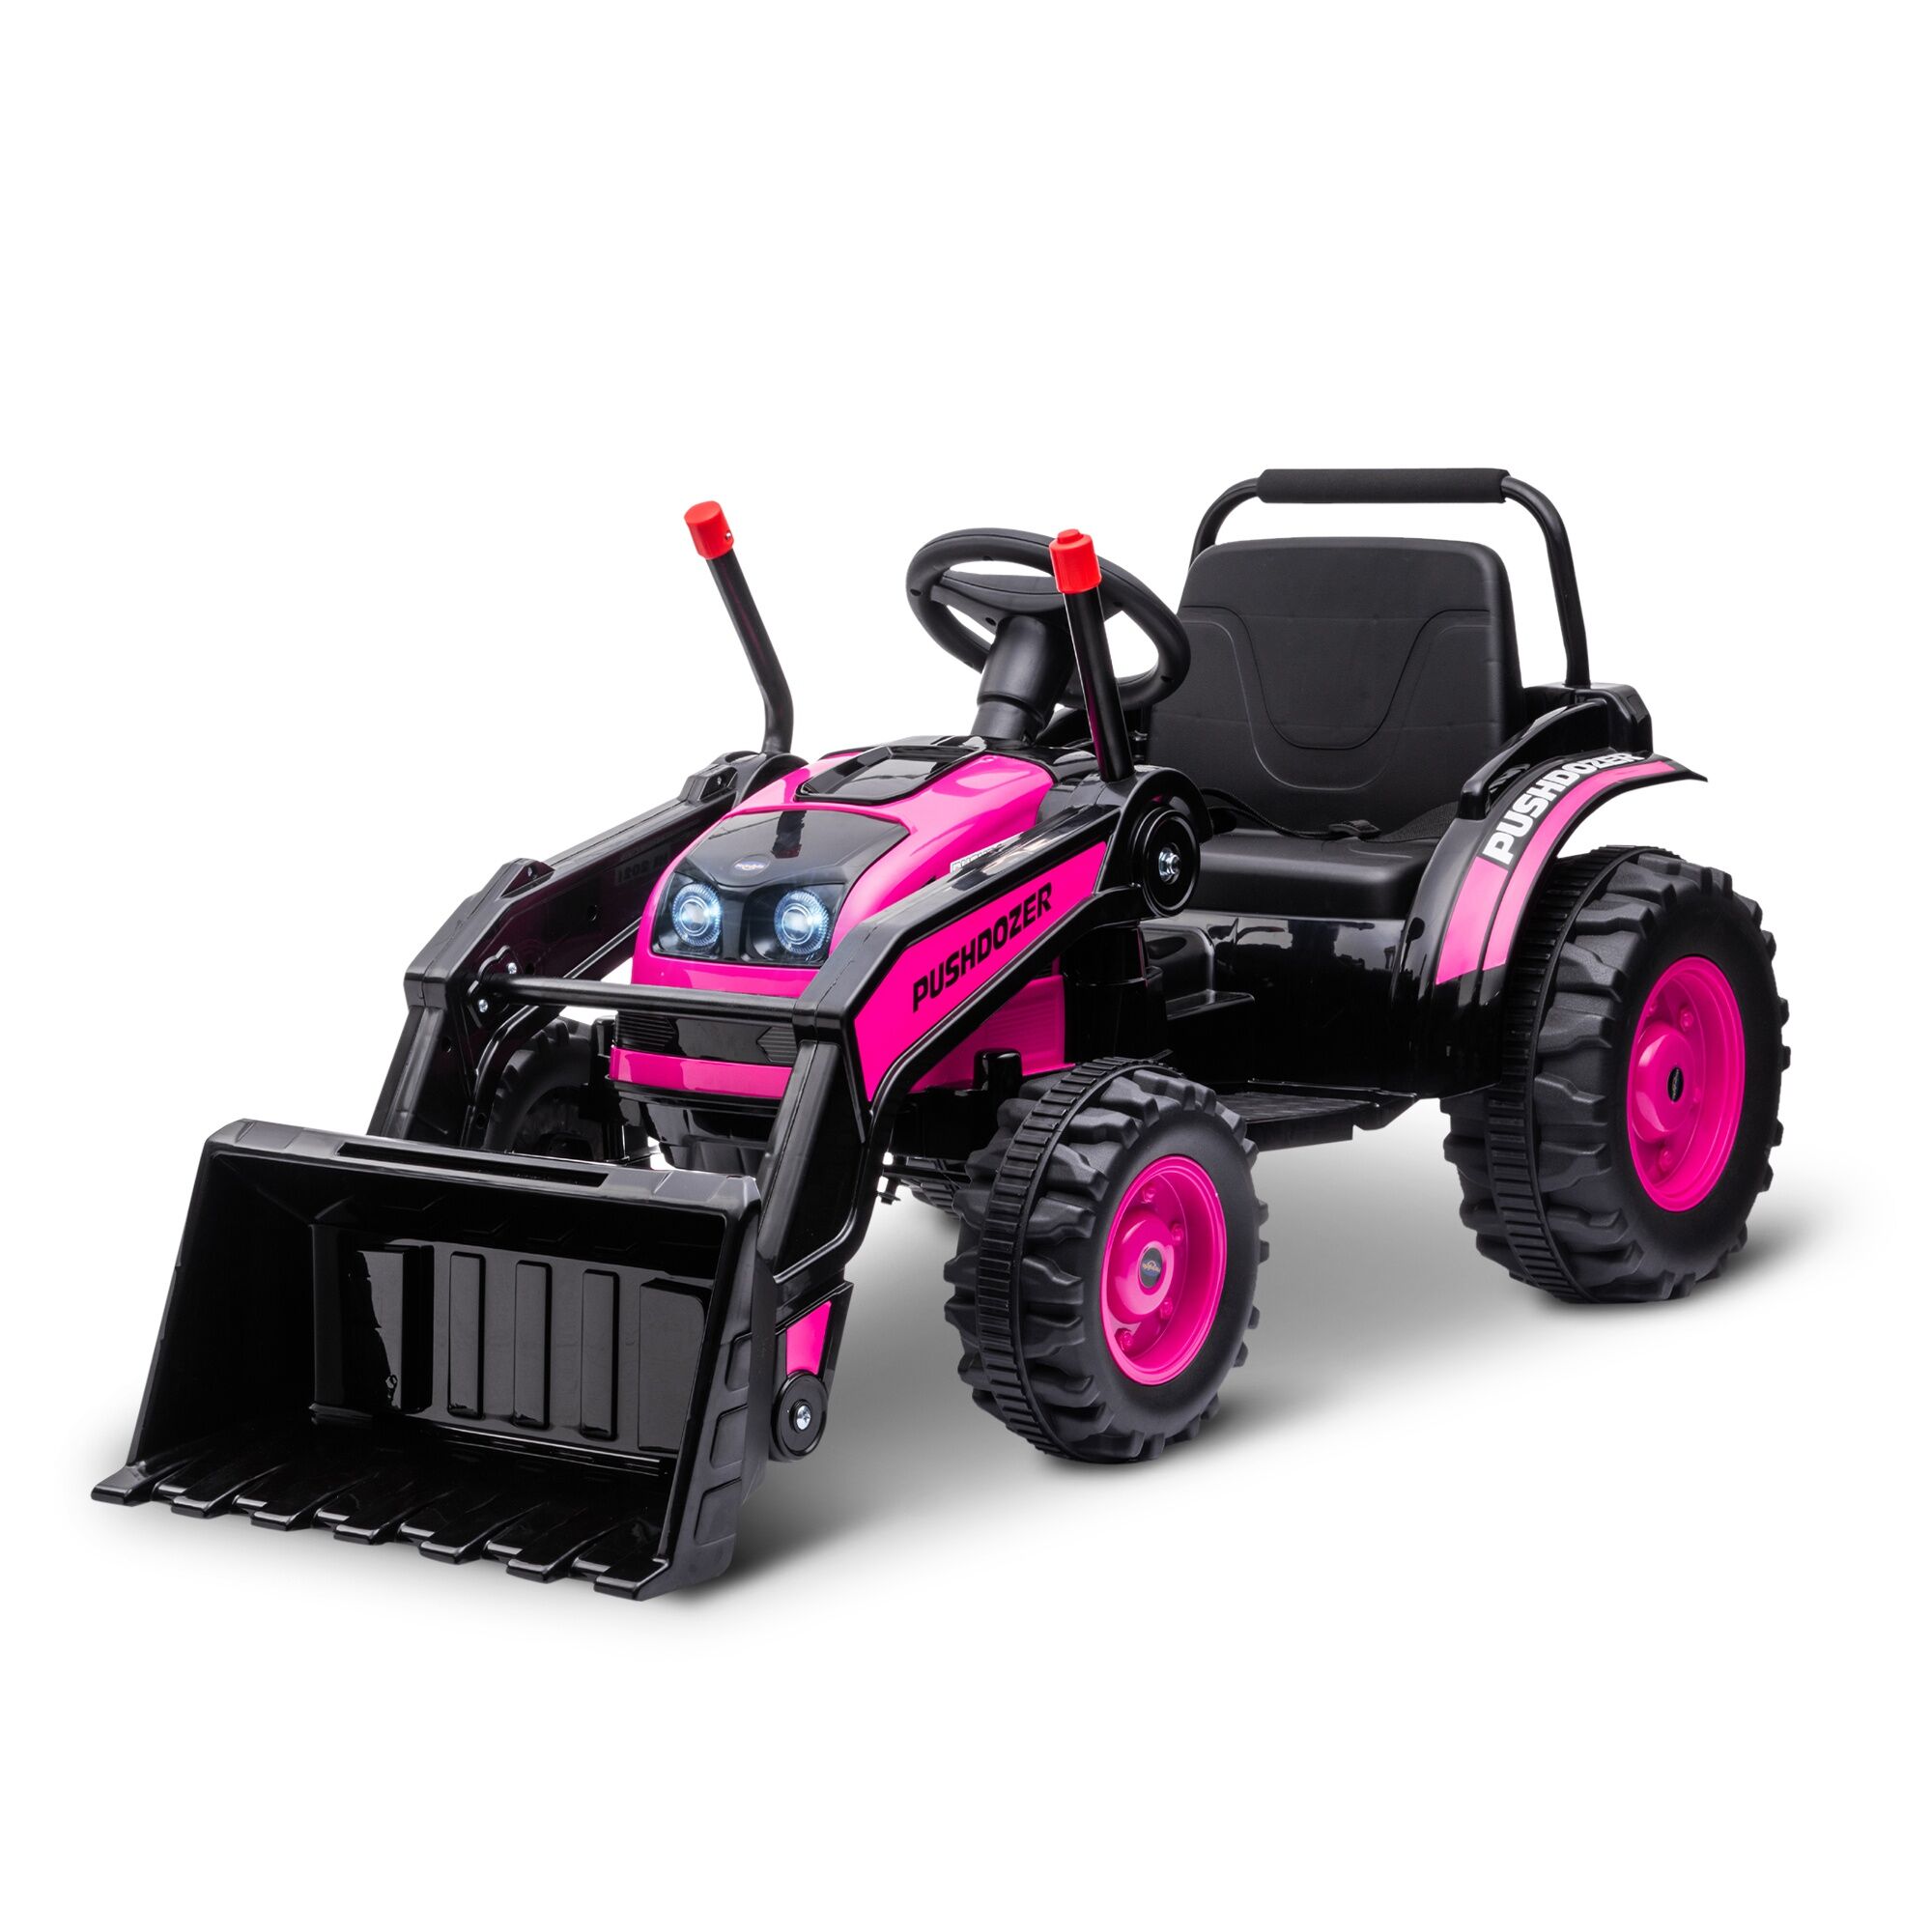 Aosom 6V Kids Electric Ride on Construction Excavator, Rechargeable Battery Powered Truck with High/Low Speed Realistic Sound and Headlights, Pink